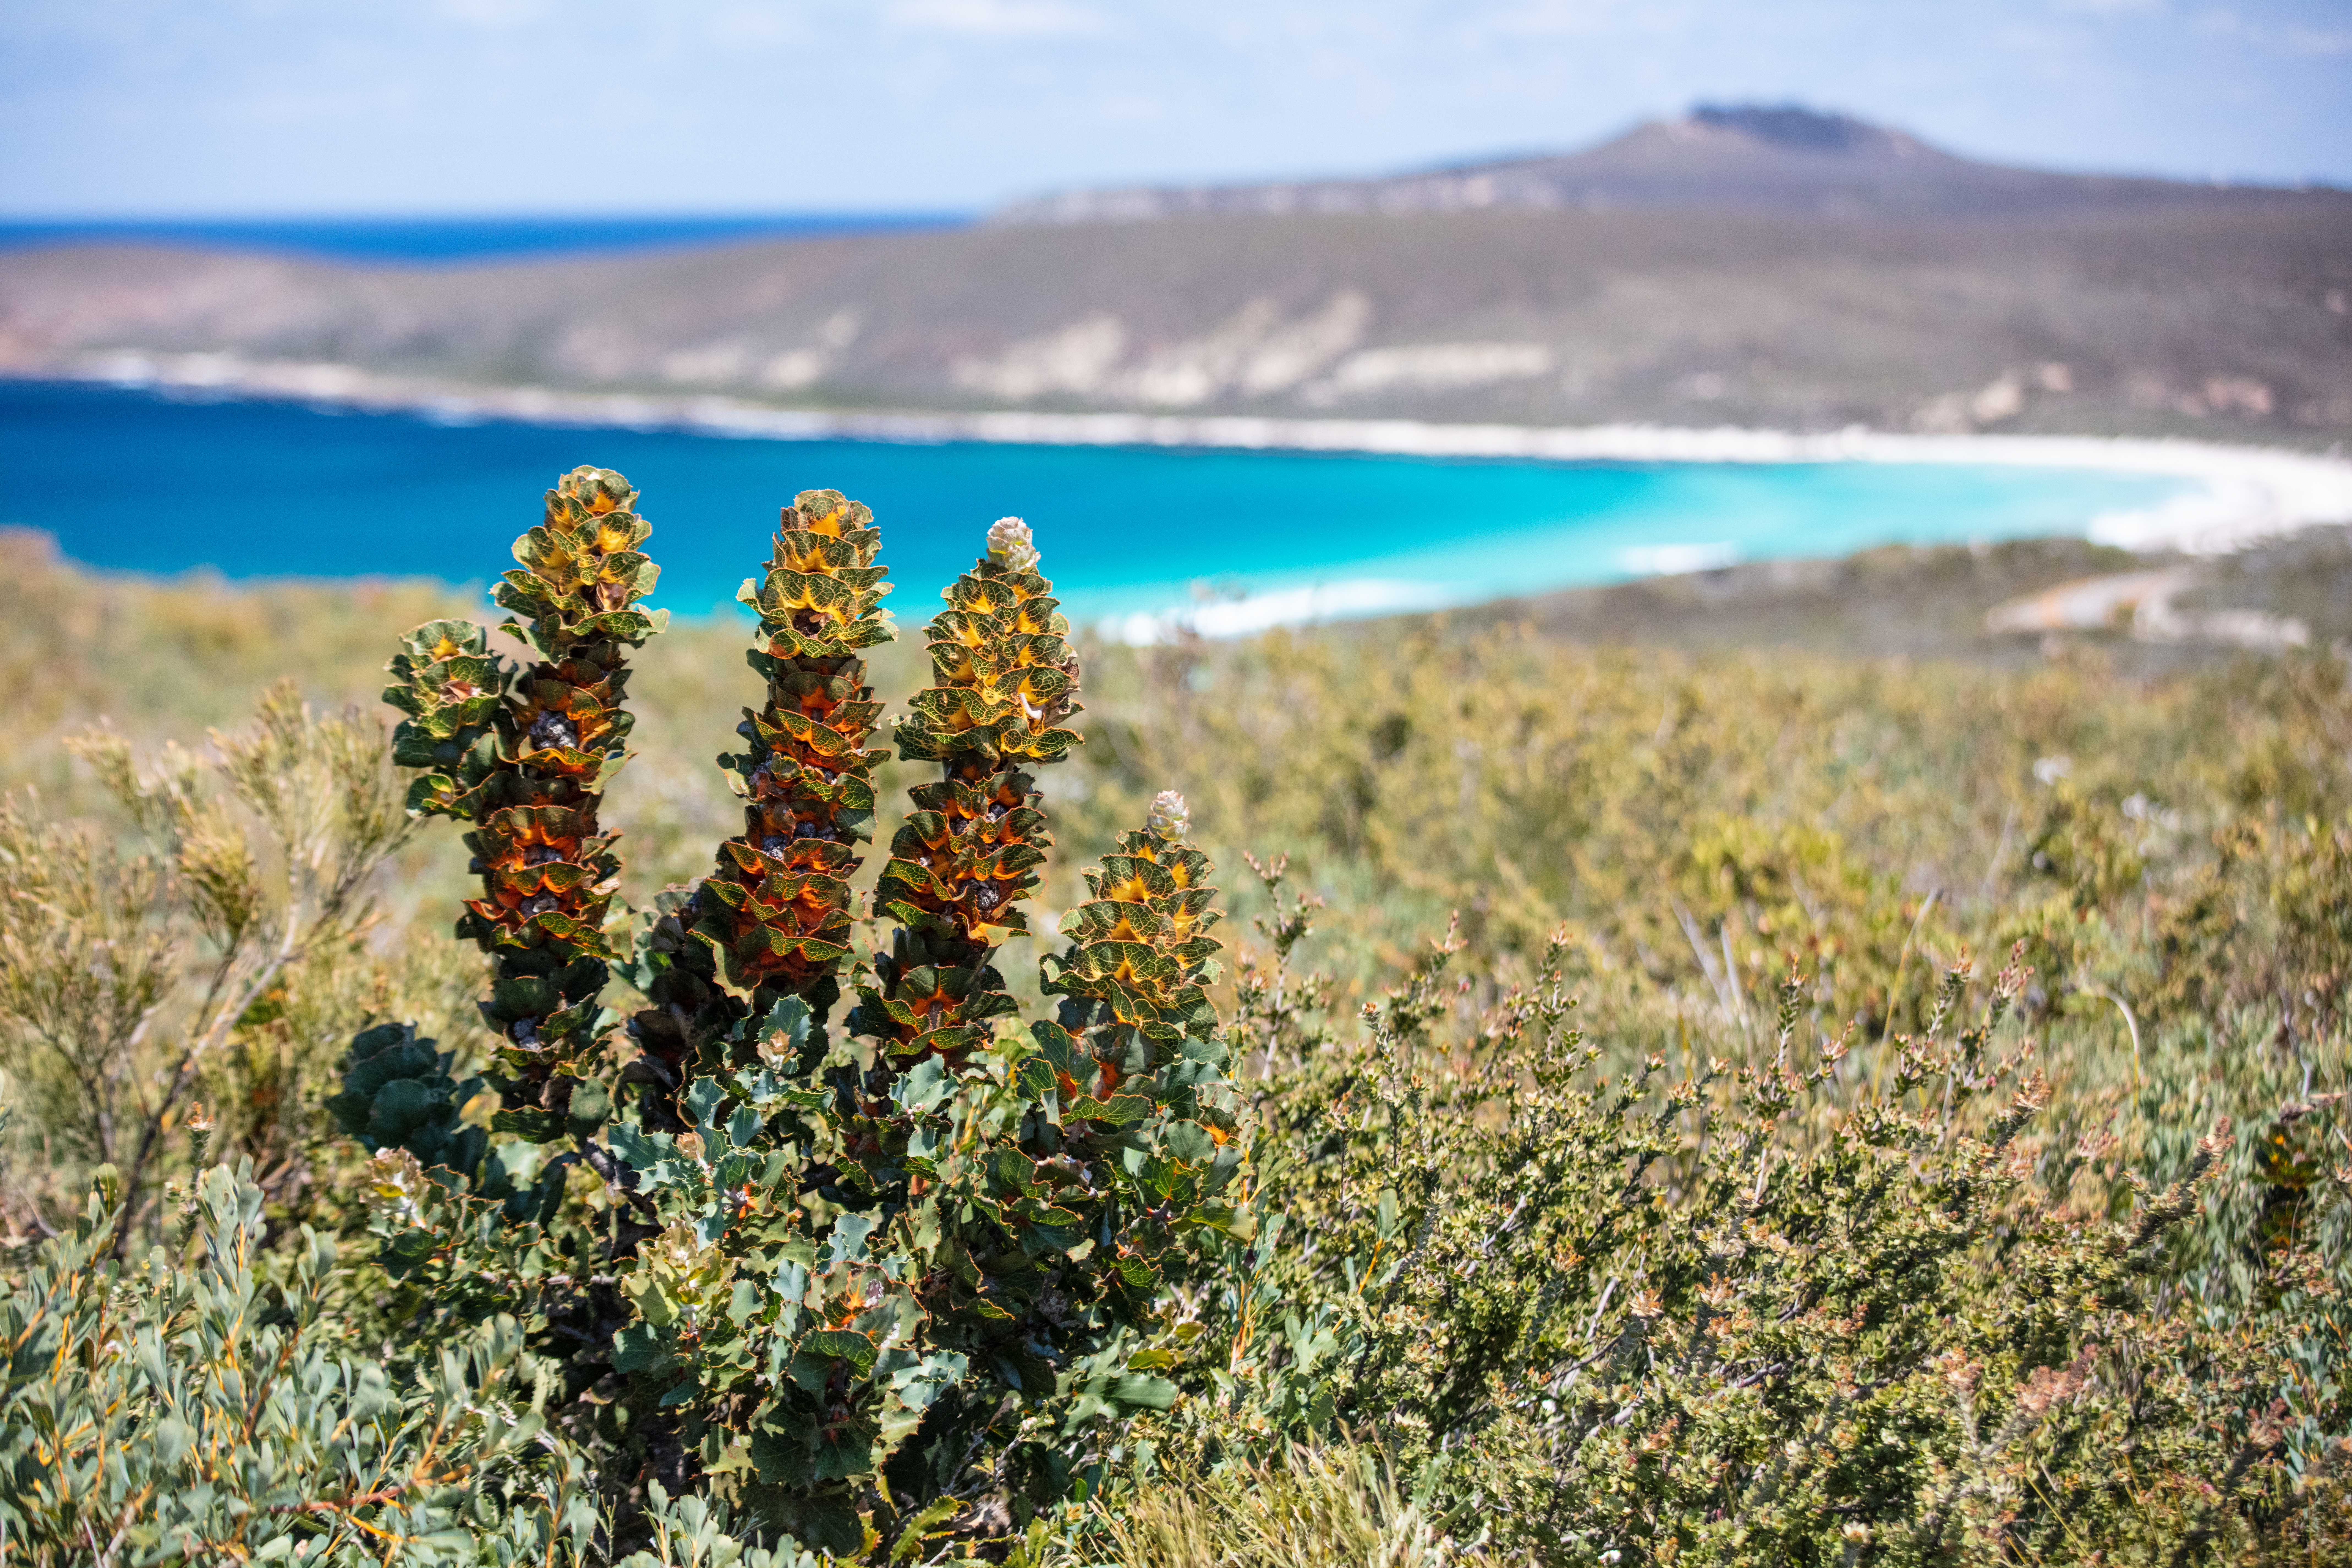 close up of Australian bushland flowers to show biodiversity and amazing blue beach in background in Fitzgerald River National Park